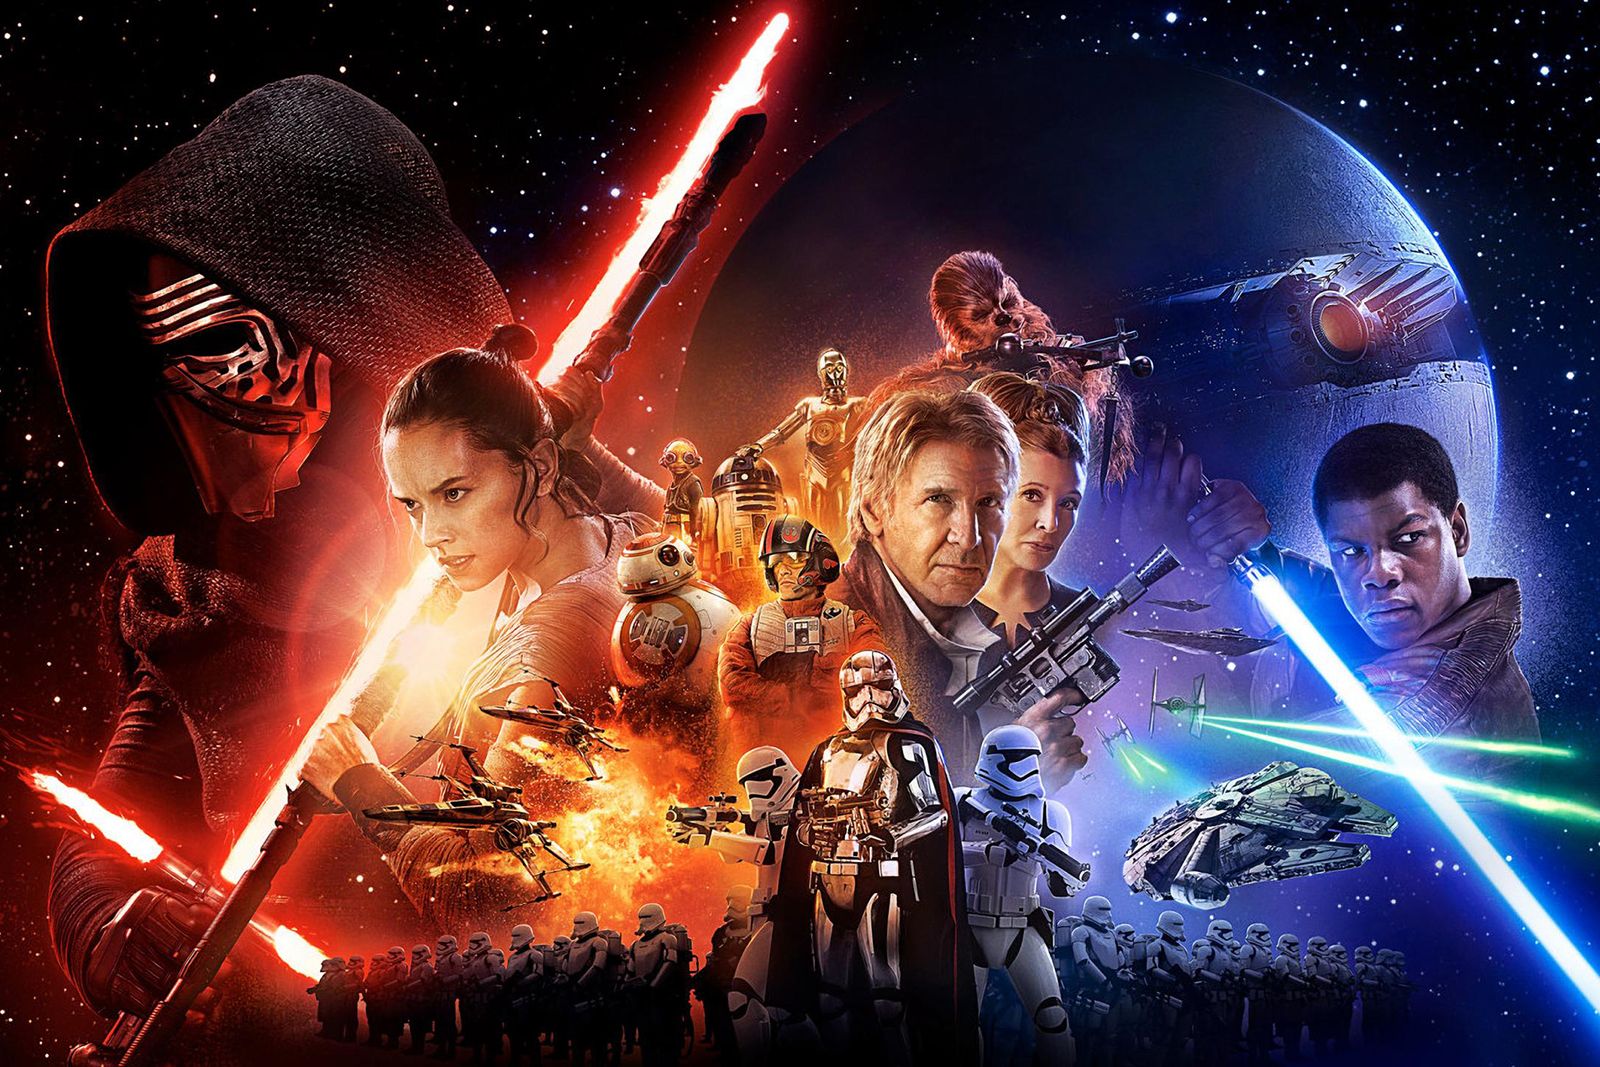 Star Wars order: Best order to watch the movies and shows